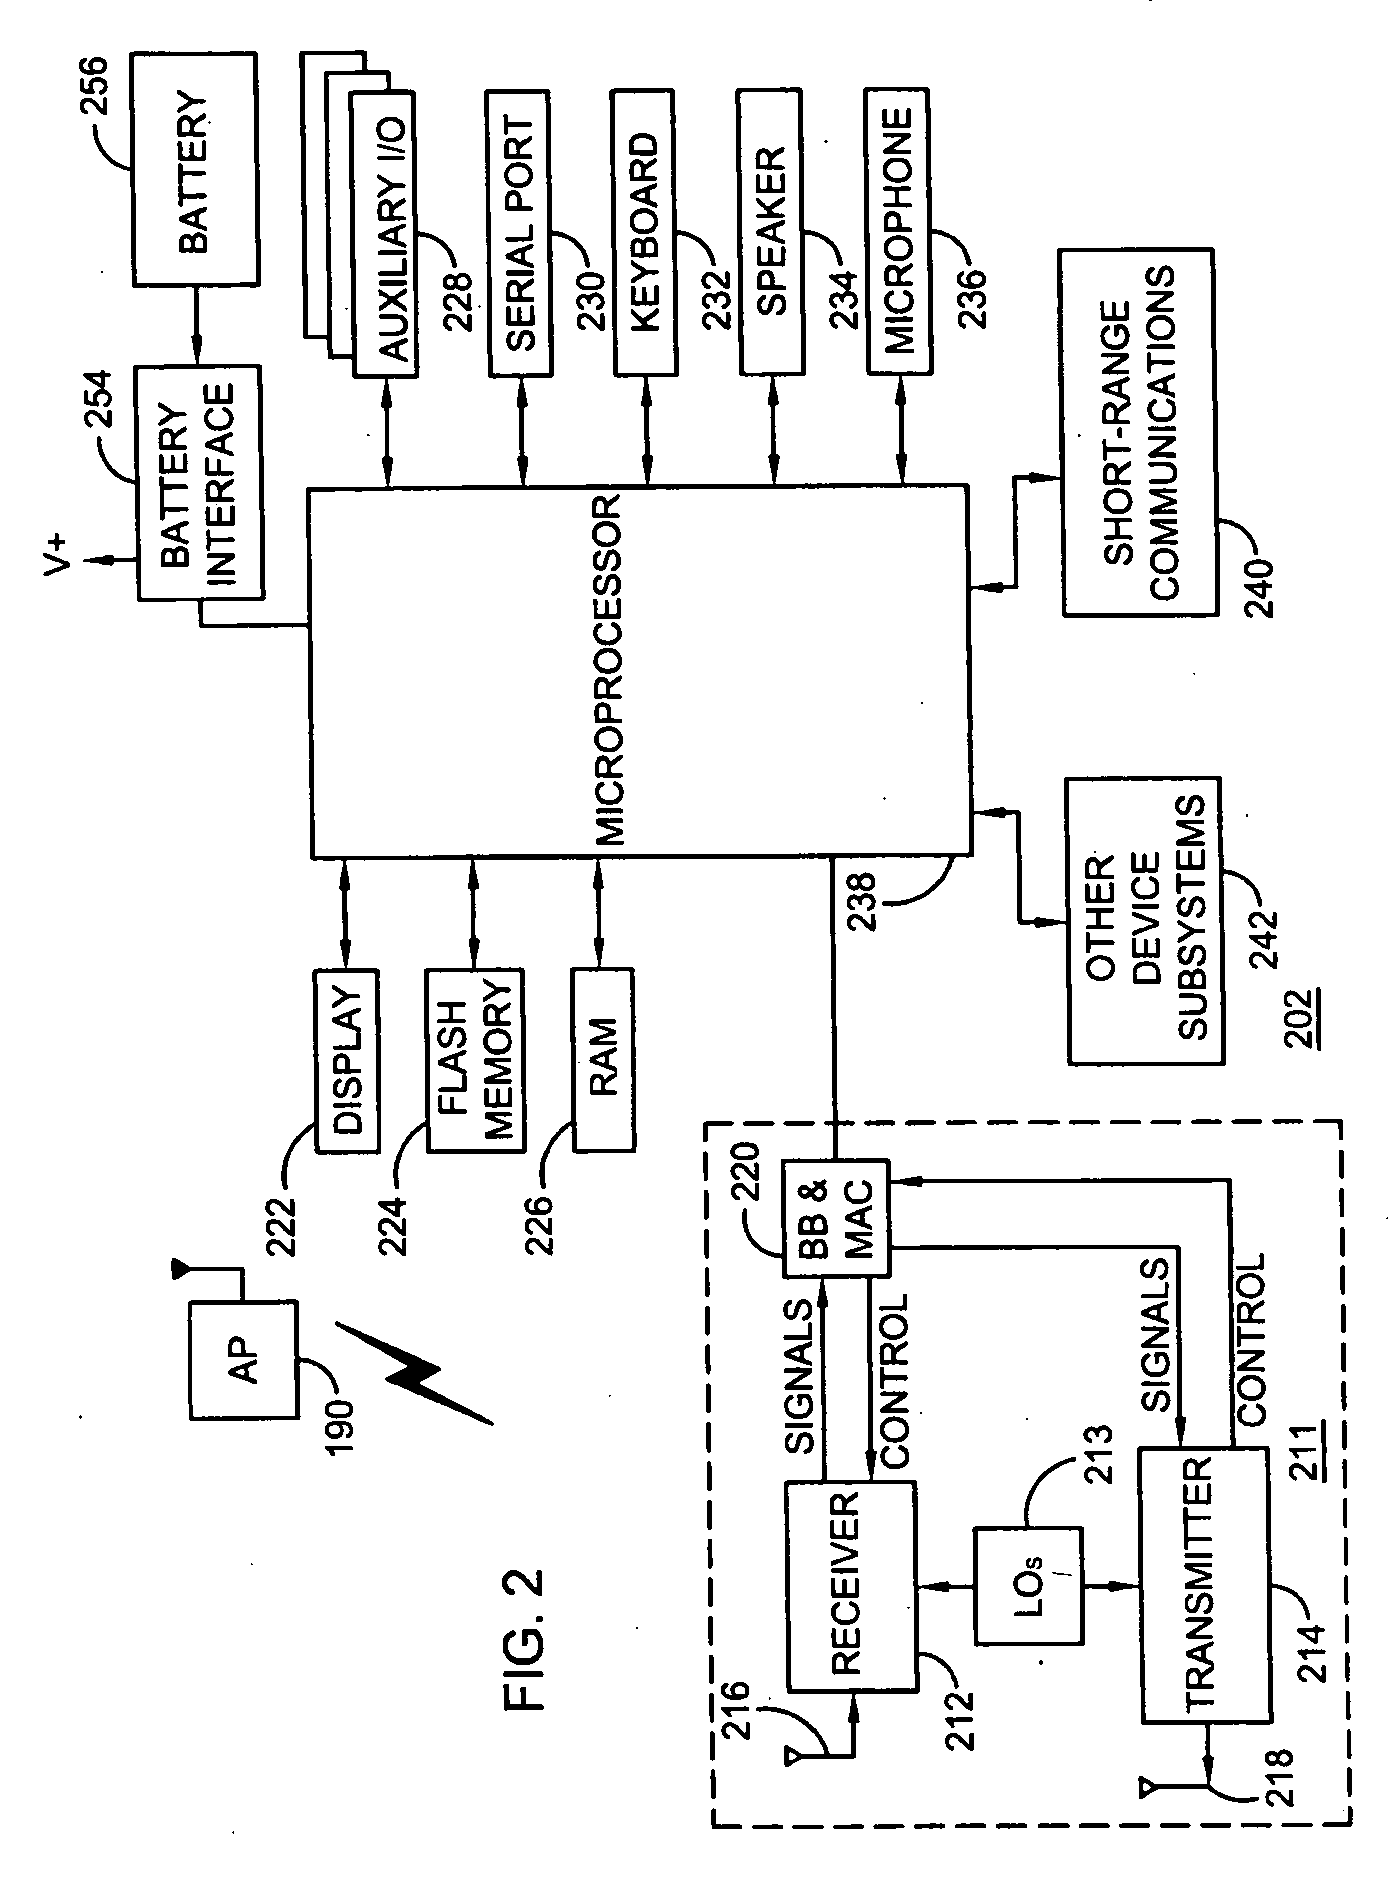 Methods and apparatus for reducing power consumption for mobile devices using broadcast-to-unicast message conversion